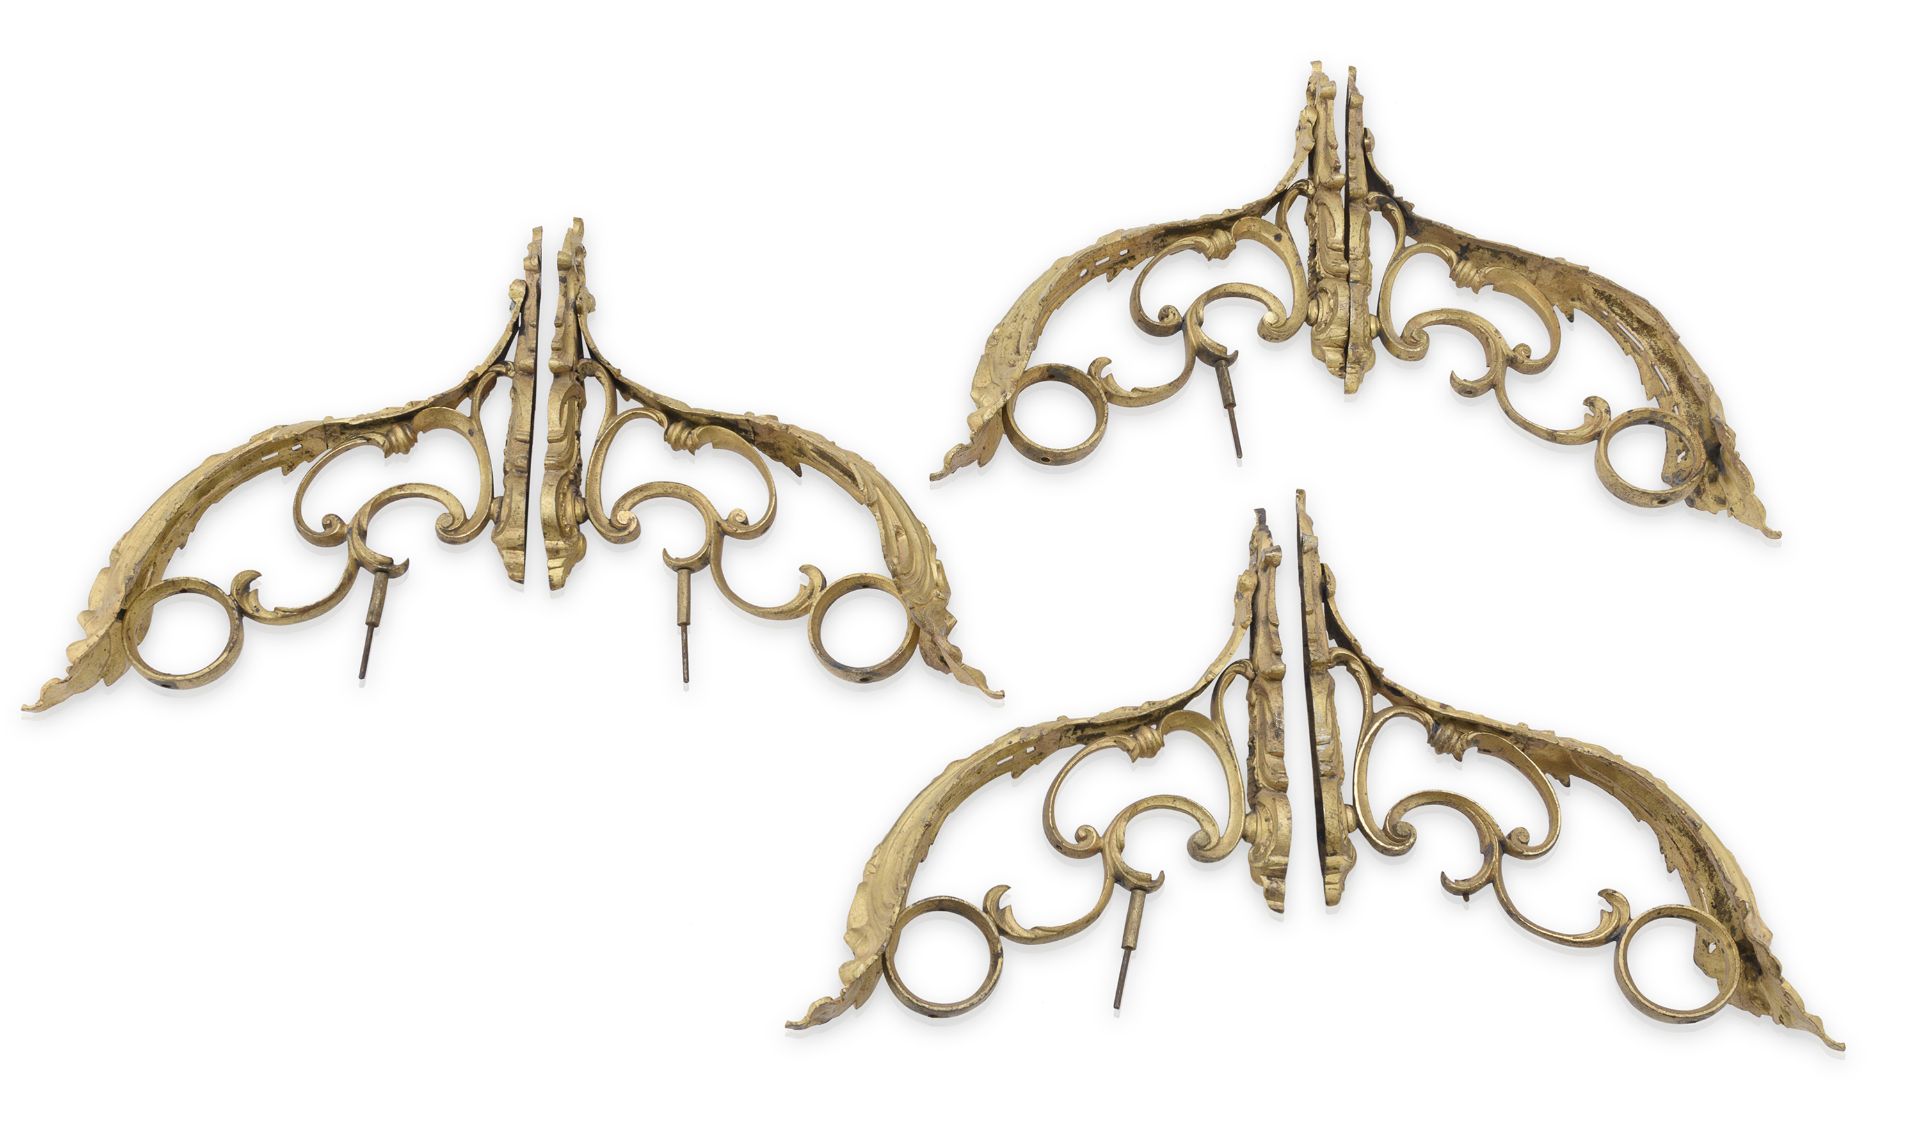 THREE PAIRS OF VALANCE SUPPORTS IN GILDED BRONZE 18TH CENTURY